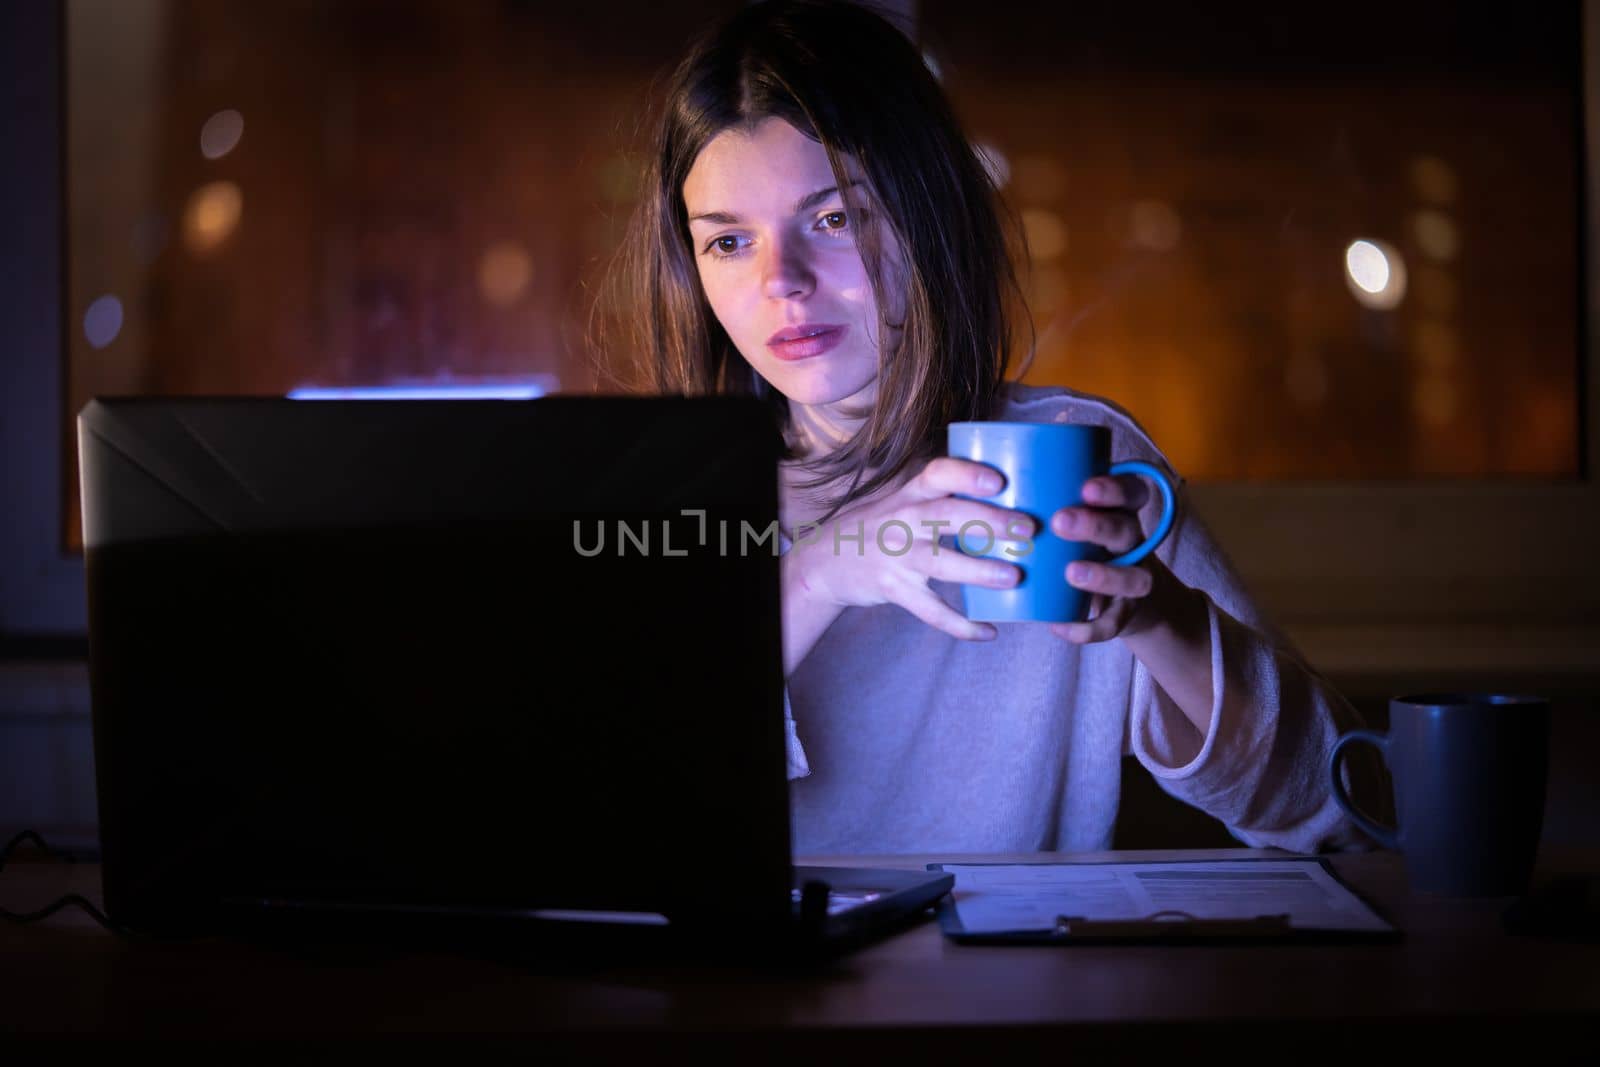 Young girl works at a laptop online at night against the background with the city lights outside the window. Woman is drinking coffee, holding a cup in her hands and reading the text on her device.